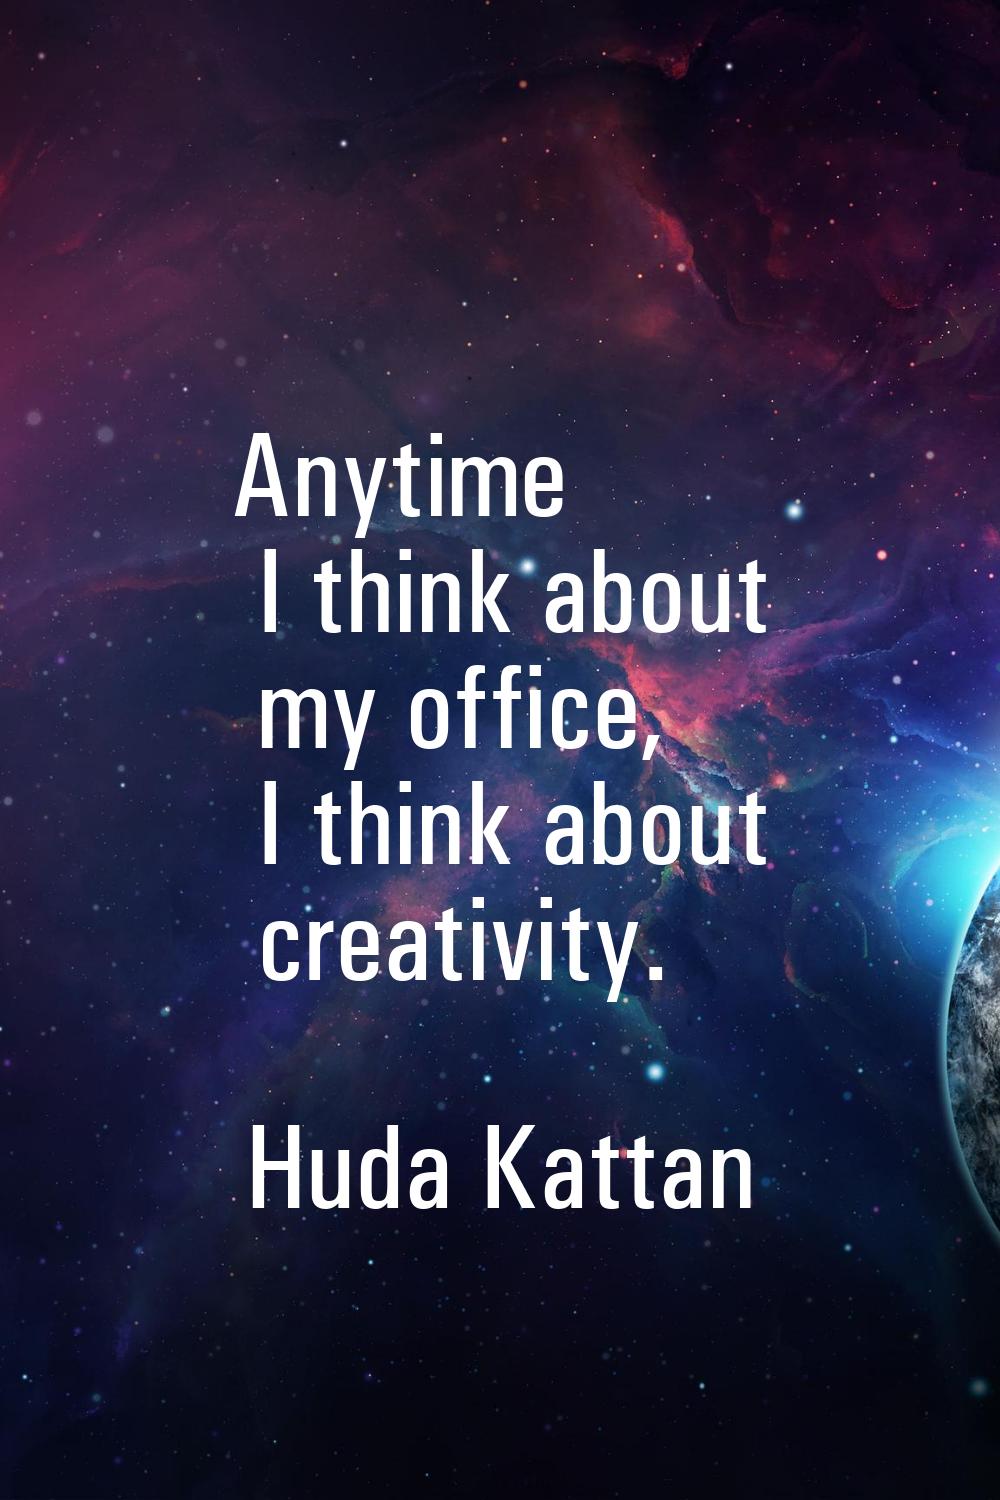 Anytime I think about my office, I think about creativity.